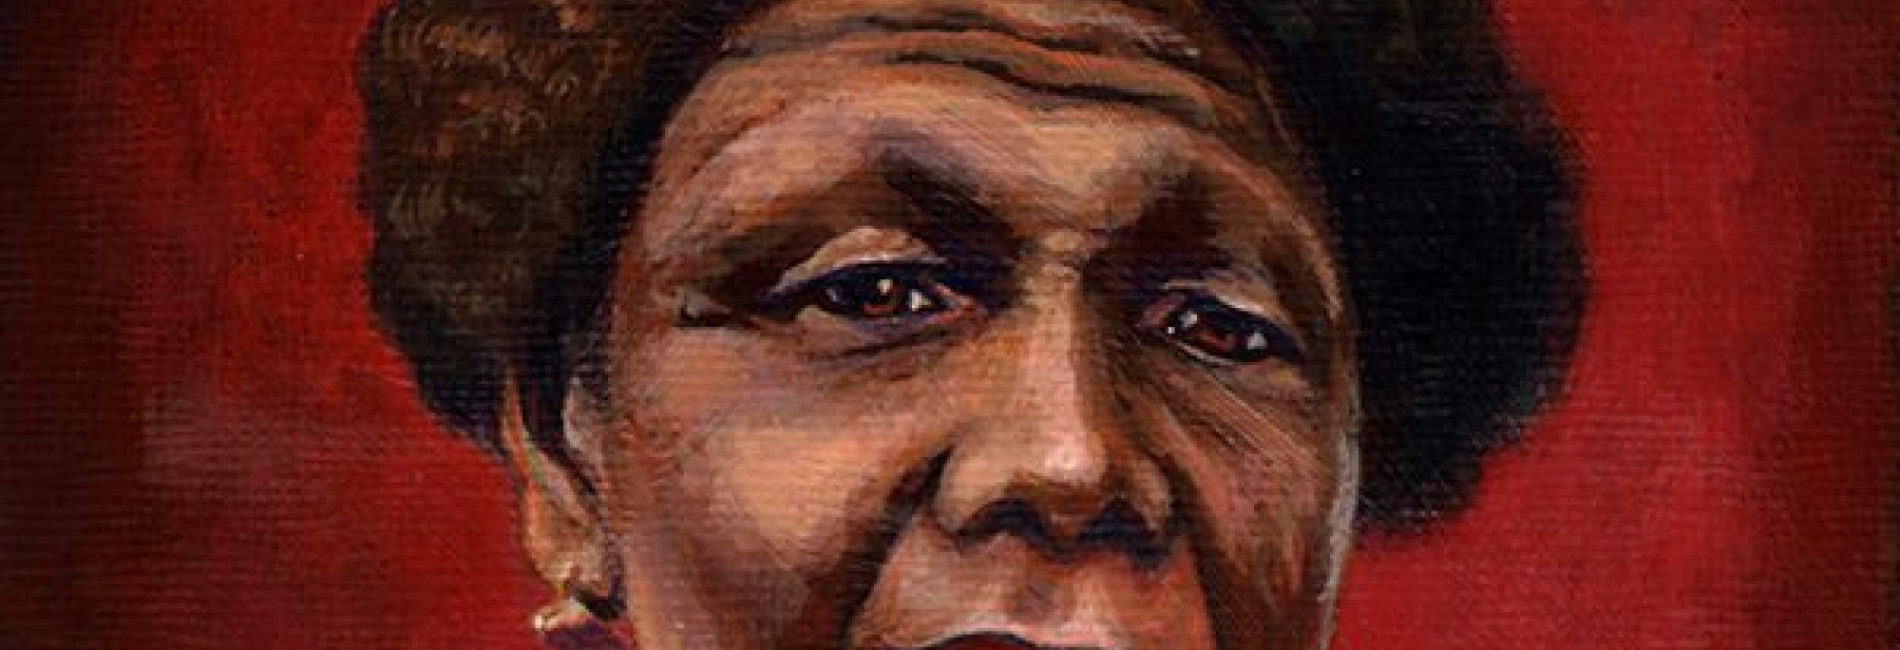 Inspiring People - Mary Seacole